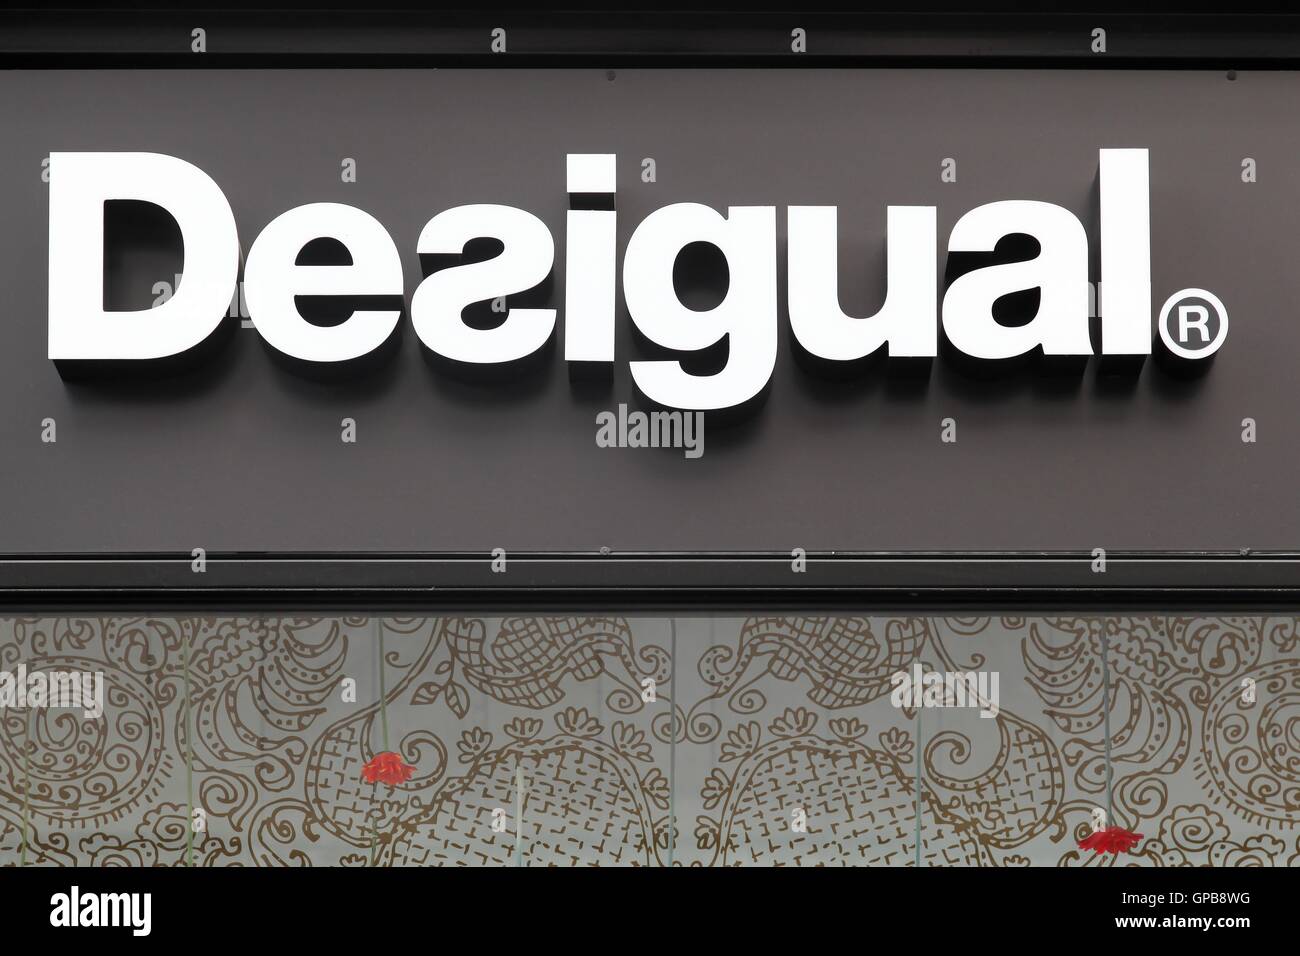 Desigual logo on a wall of a store. Desigual is a clothing brand headquartered in Barcelona, Catalonia, Spain Stock Photo